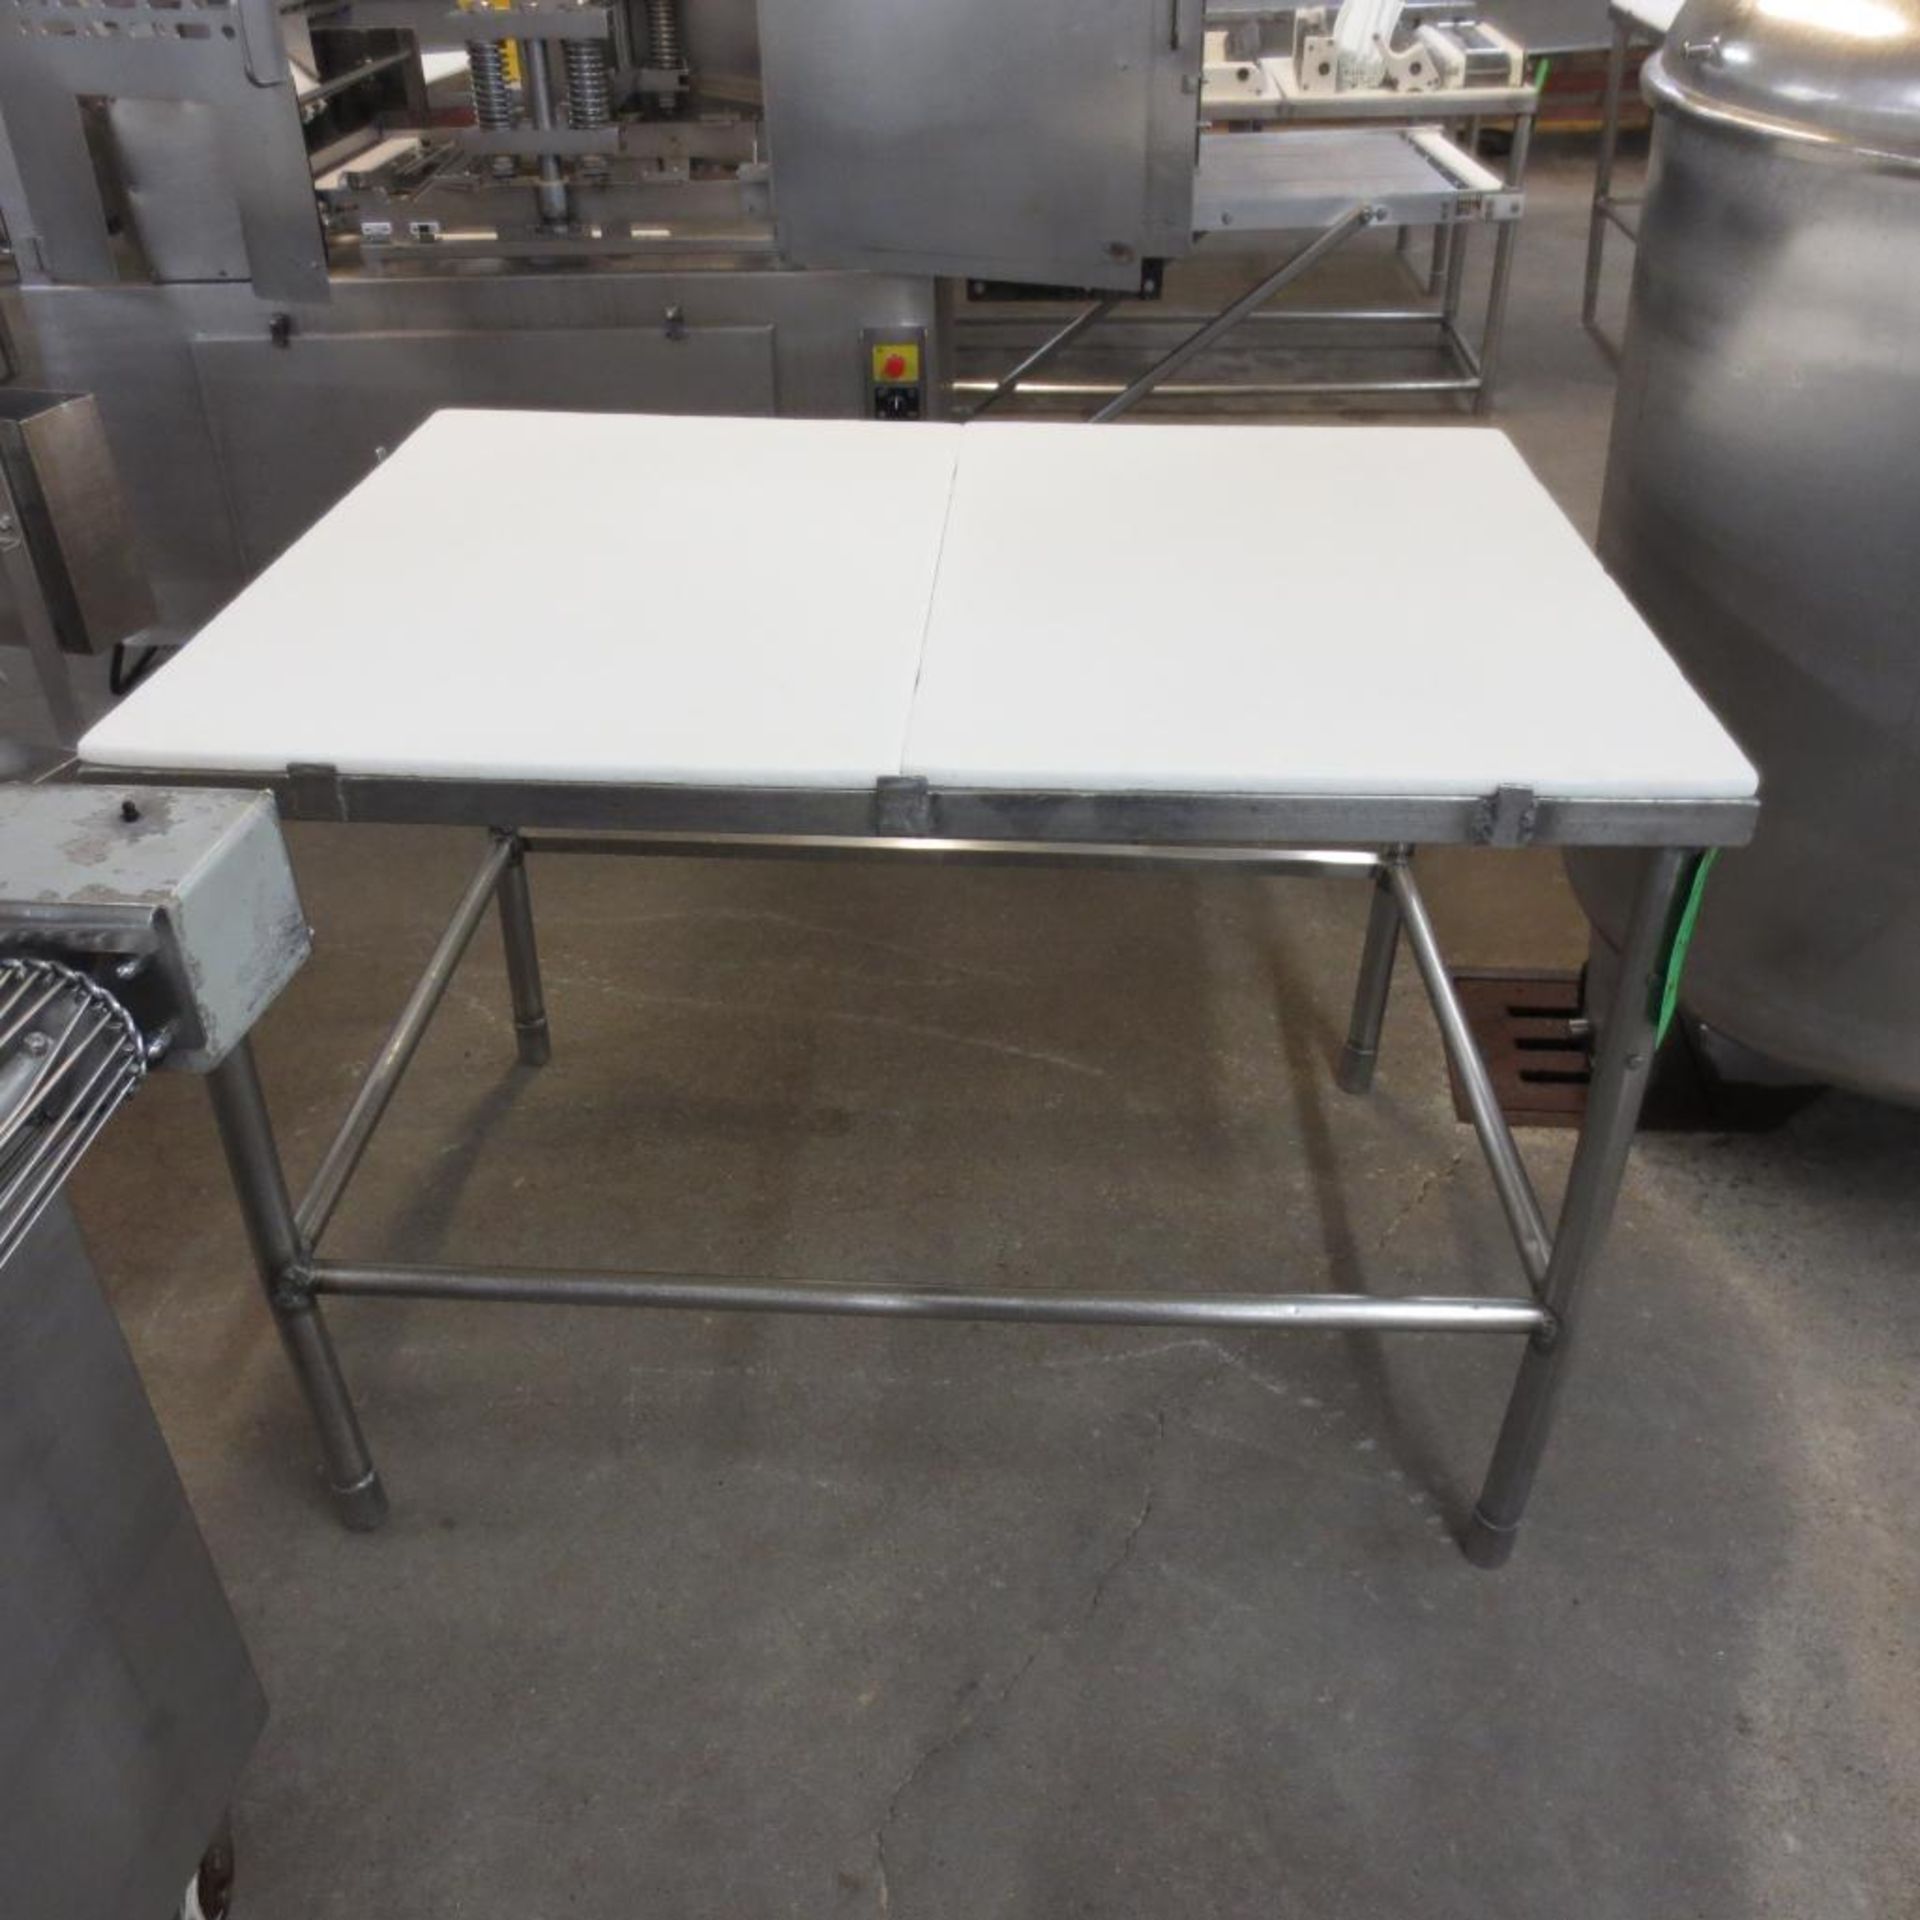 48" X 36" Stainless Table Frame with (2) 36" X 24" Cutting Board Table Tops - Image 2 of 2